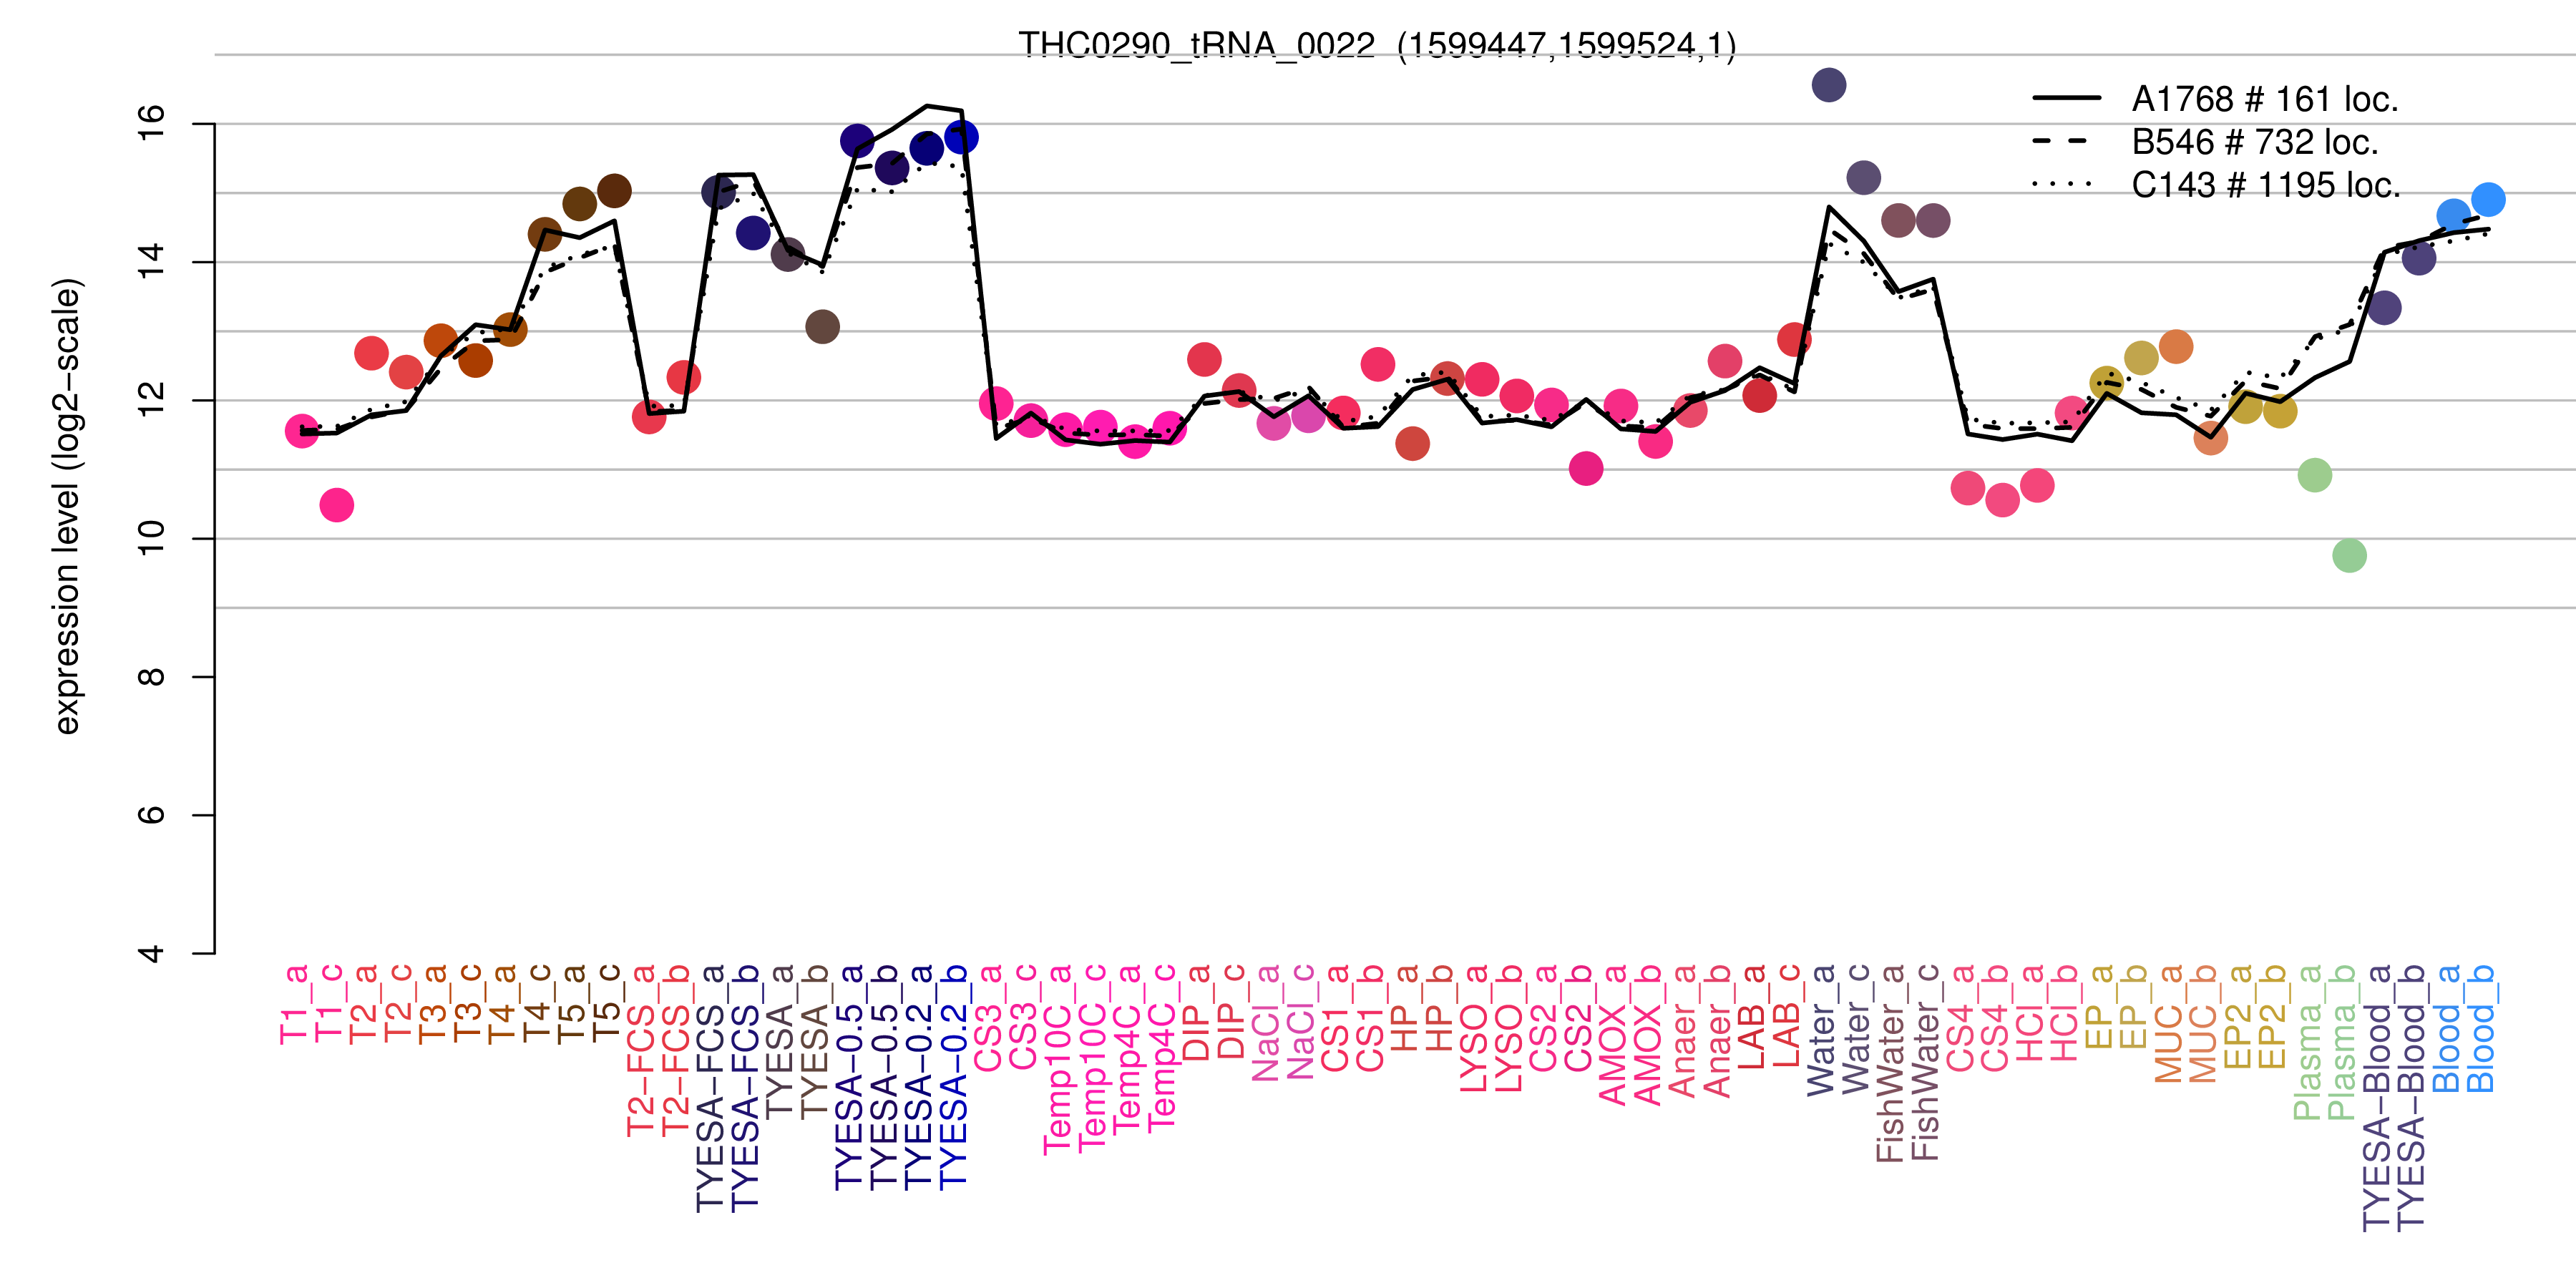 THC0290_tRNA_0022 expression levels among conditions